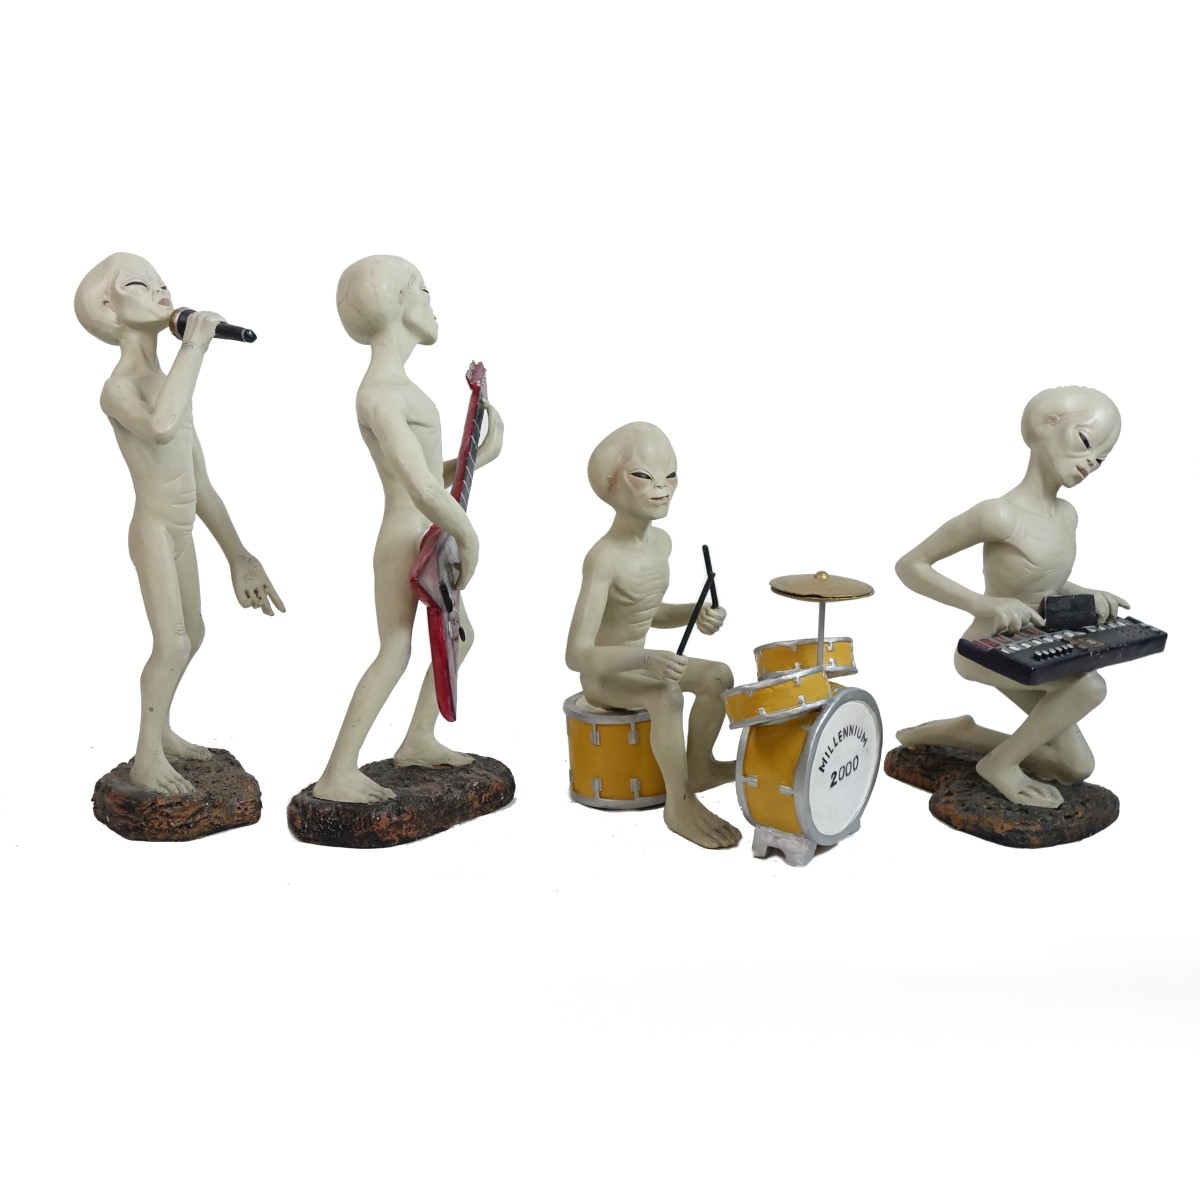 Five (5) Hand Painted Alien Rock Band Figurines